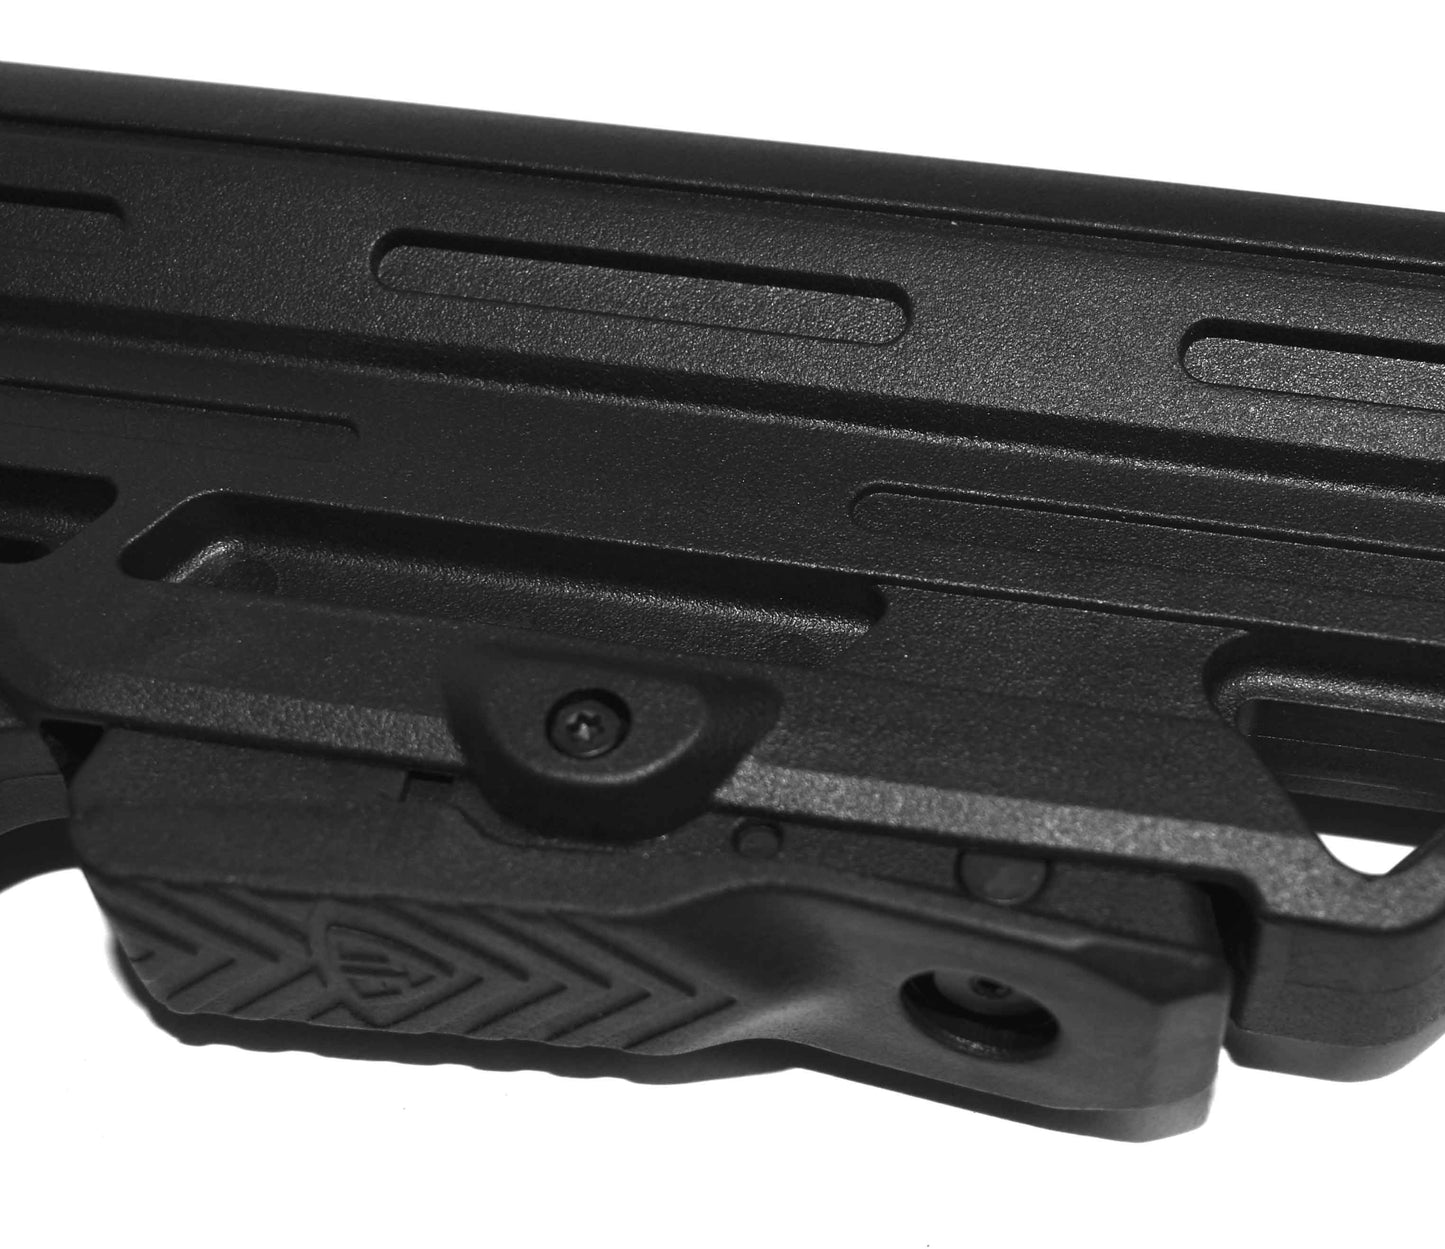 Tactical Fury Stock Compatible With Mossberg 500 12 Gauge Pump.